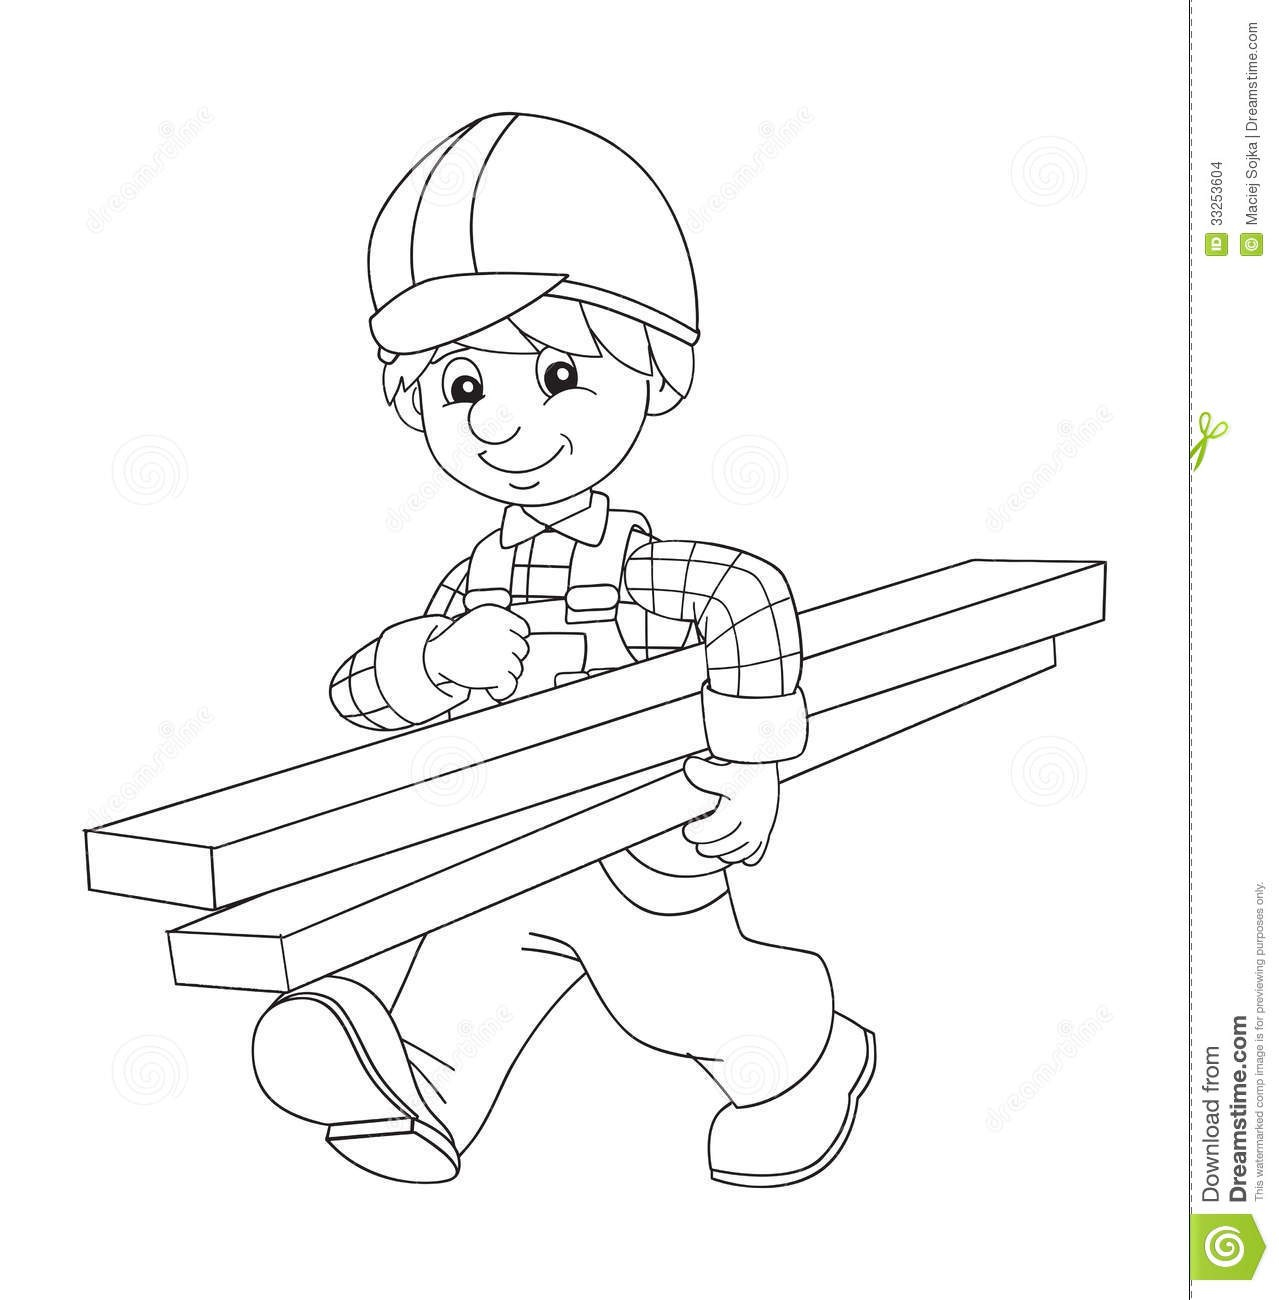 Plate Coloring Page The Coloring Plate Construction Worker Illustration For Construction